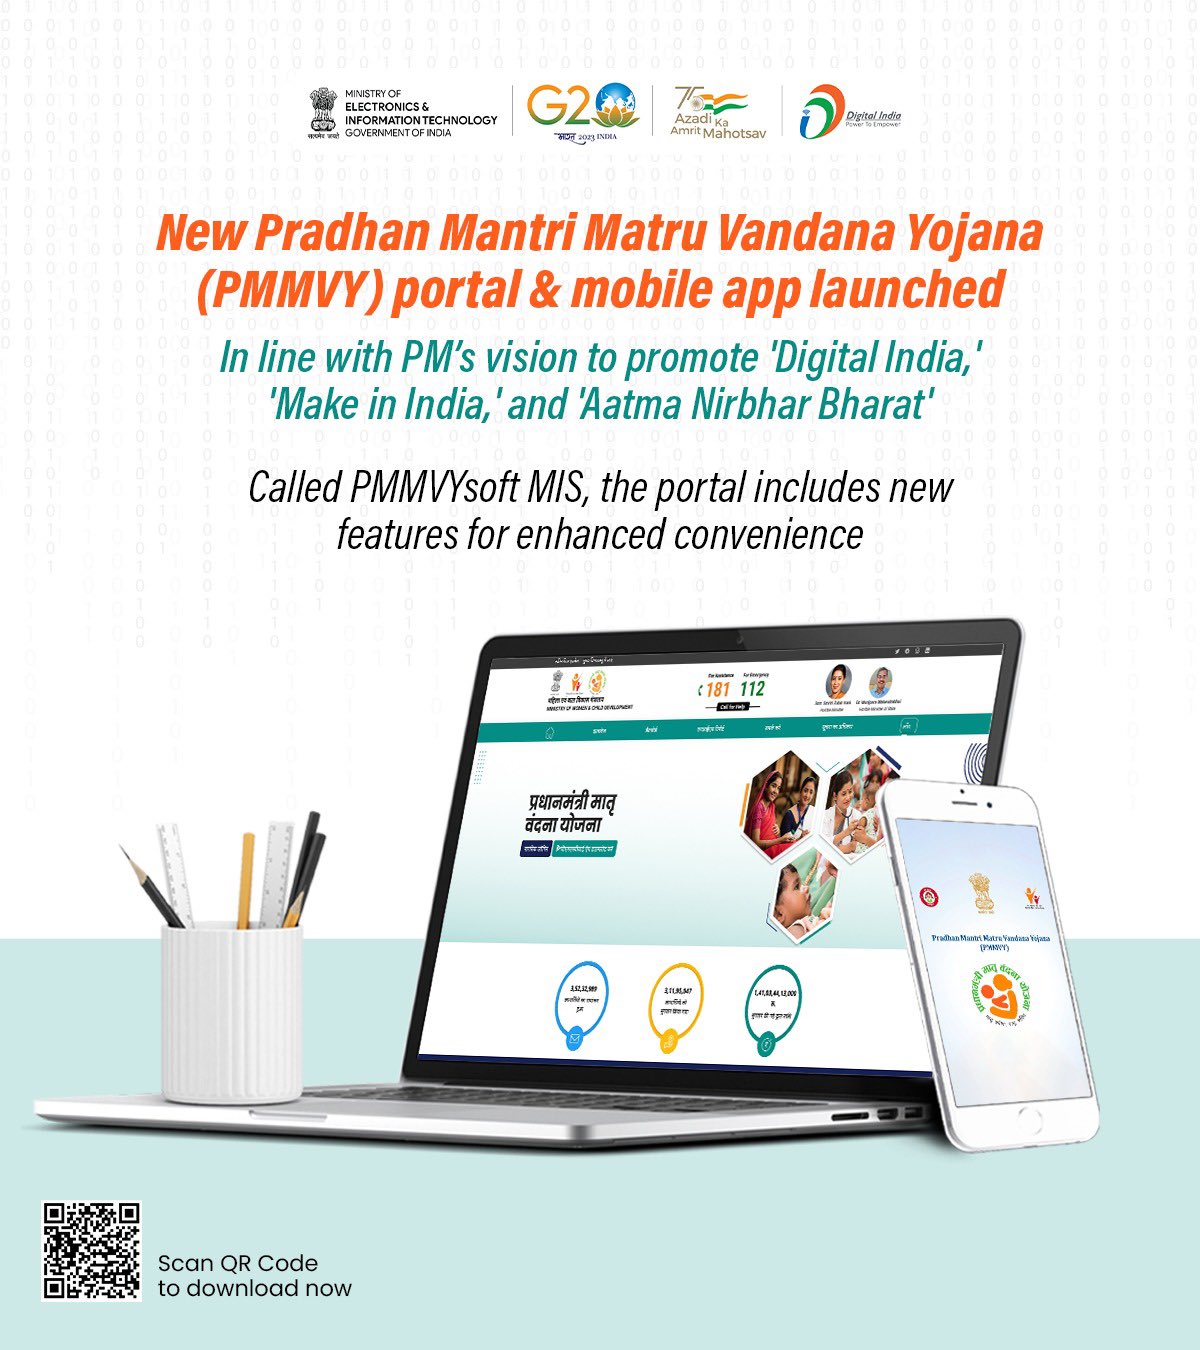 The Pradhan Mantri Matru Vandana Yojana (PMMVY) Portal and Mobile App is committed to delivering